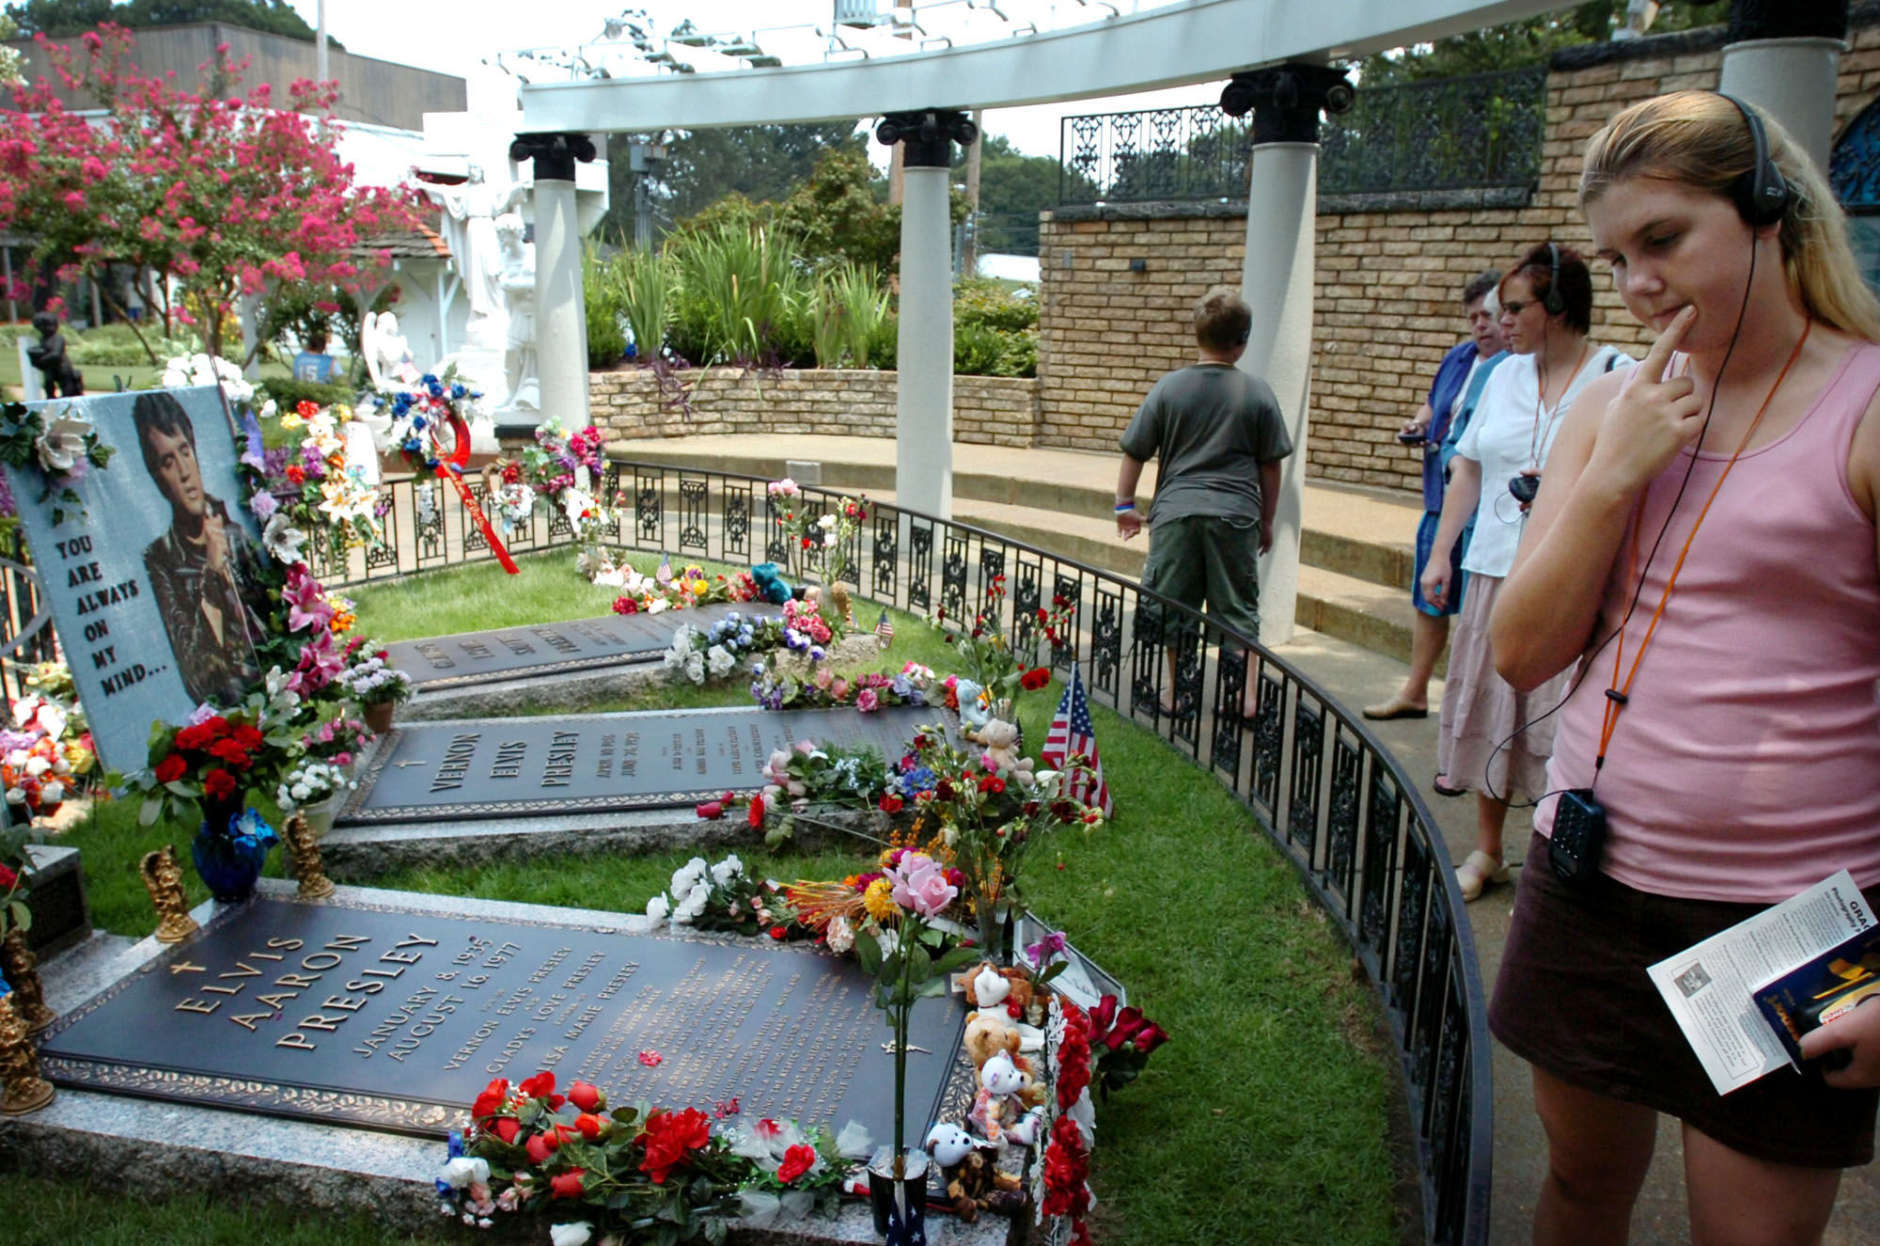 ** FILE ** In a file photo Chelsea Weir walks past the grave of Elvis Presley while taking a tour at Graceland in Memphis, Tenn., Wednesday, Aug. 3, 2005.    Elvis Presley Enterprises Inc. announced a new ad campaign on Monday, Akpril 16, 2007, as part of its effort to make the rock legend's former home Graceland a tourist destination on par with larger theme parks. (AP Photo/Mike Brown)